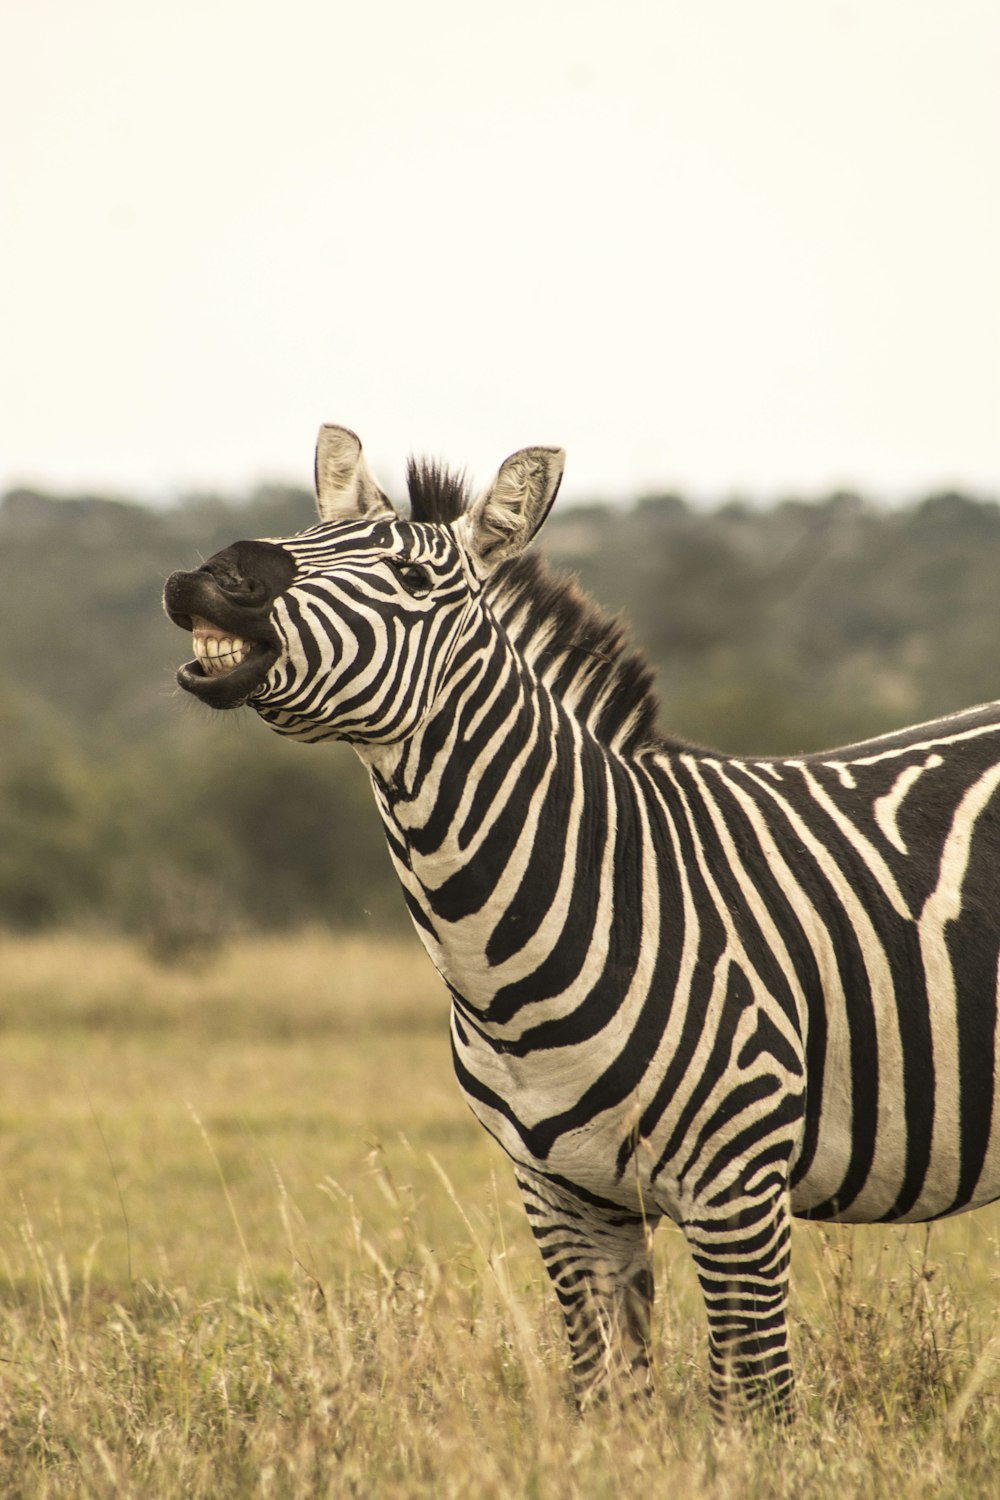 a zebra standing in a grassy field with trees in the background